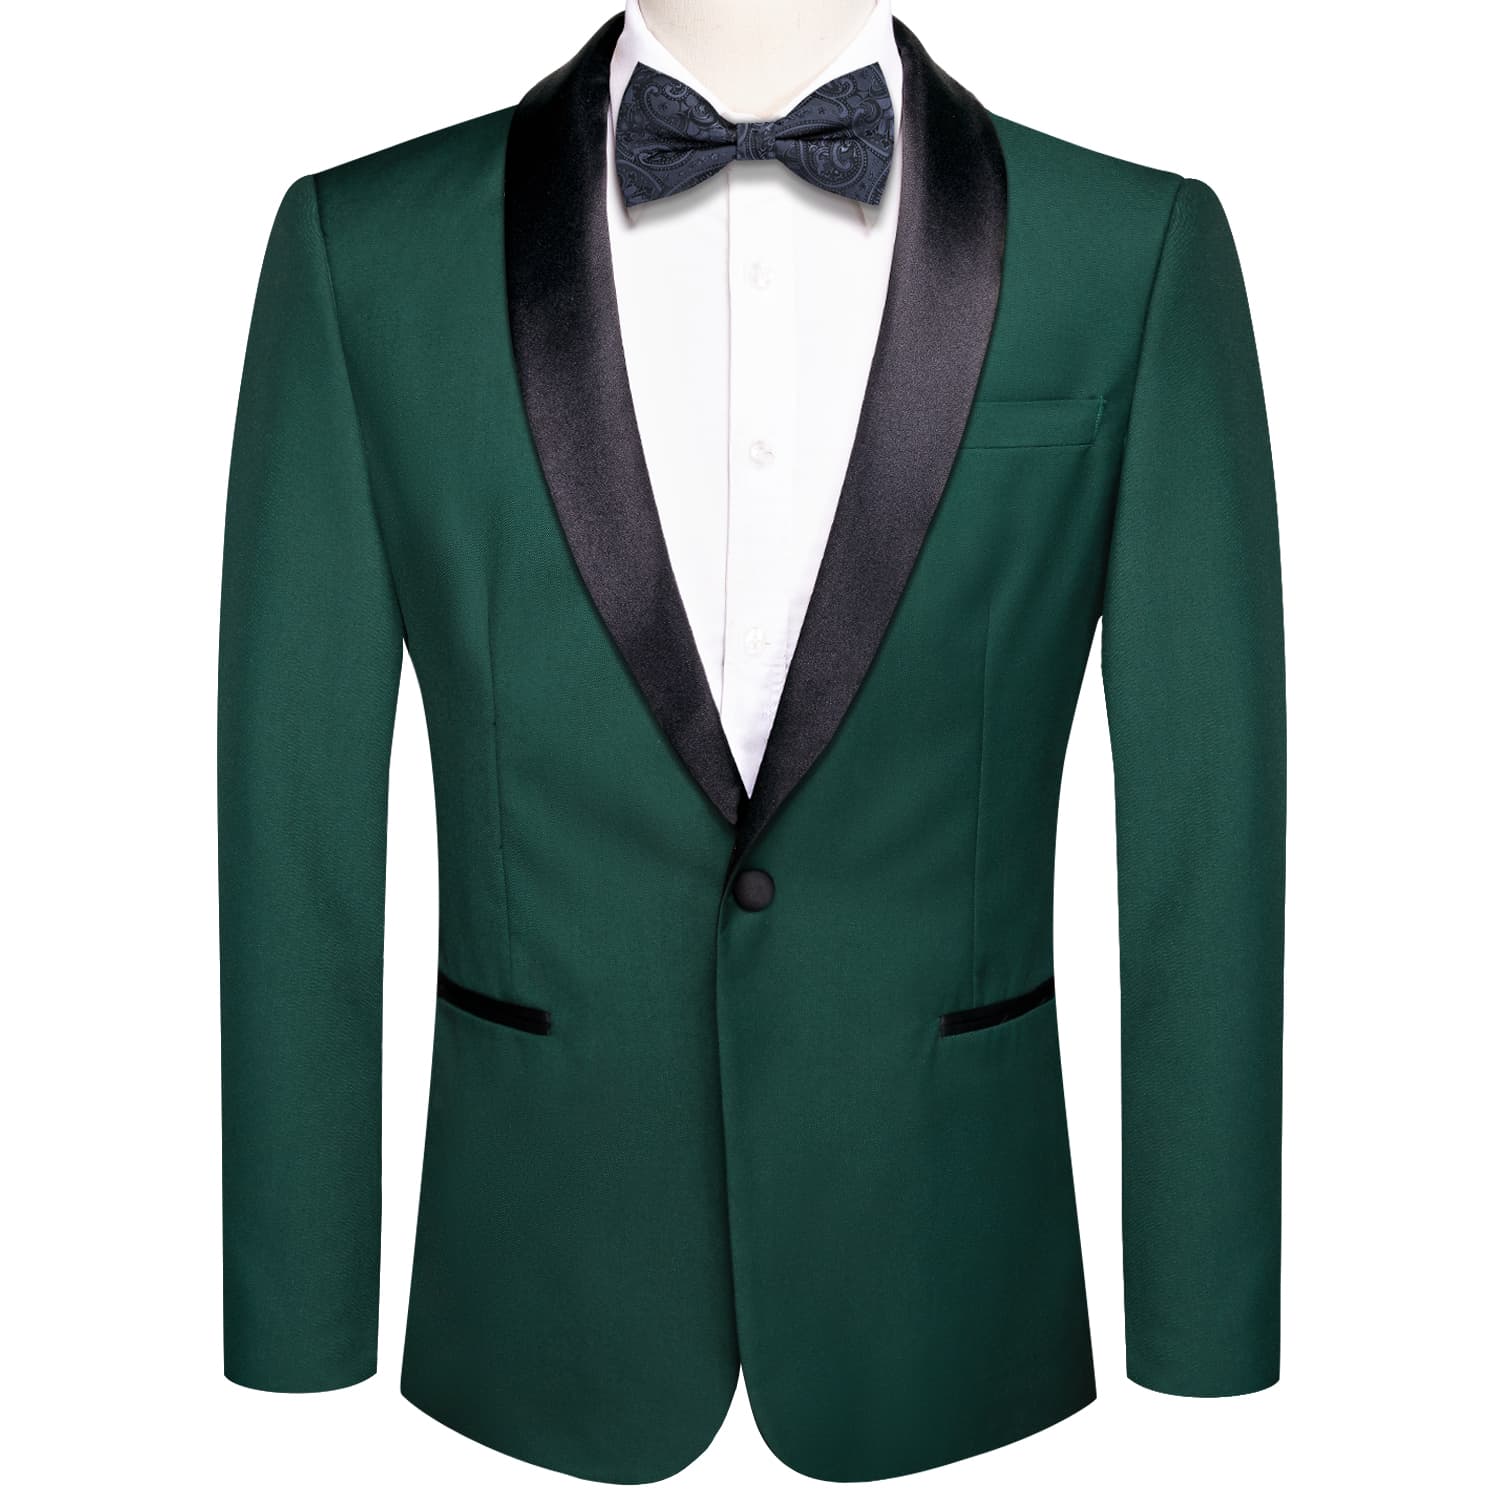 A sophisticated Hi-Tie Black Shawl Collar Green Solid Blazer paired with a matching Bowtie in a Men's Suit Set